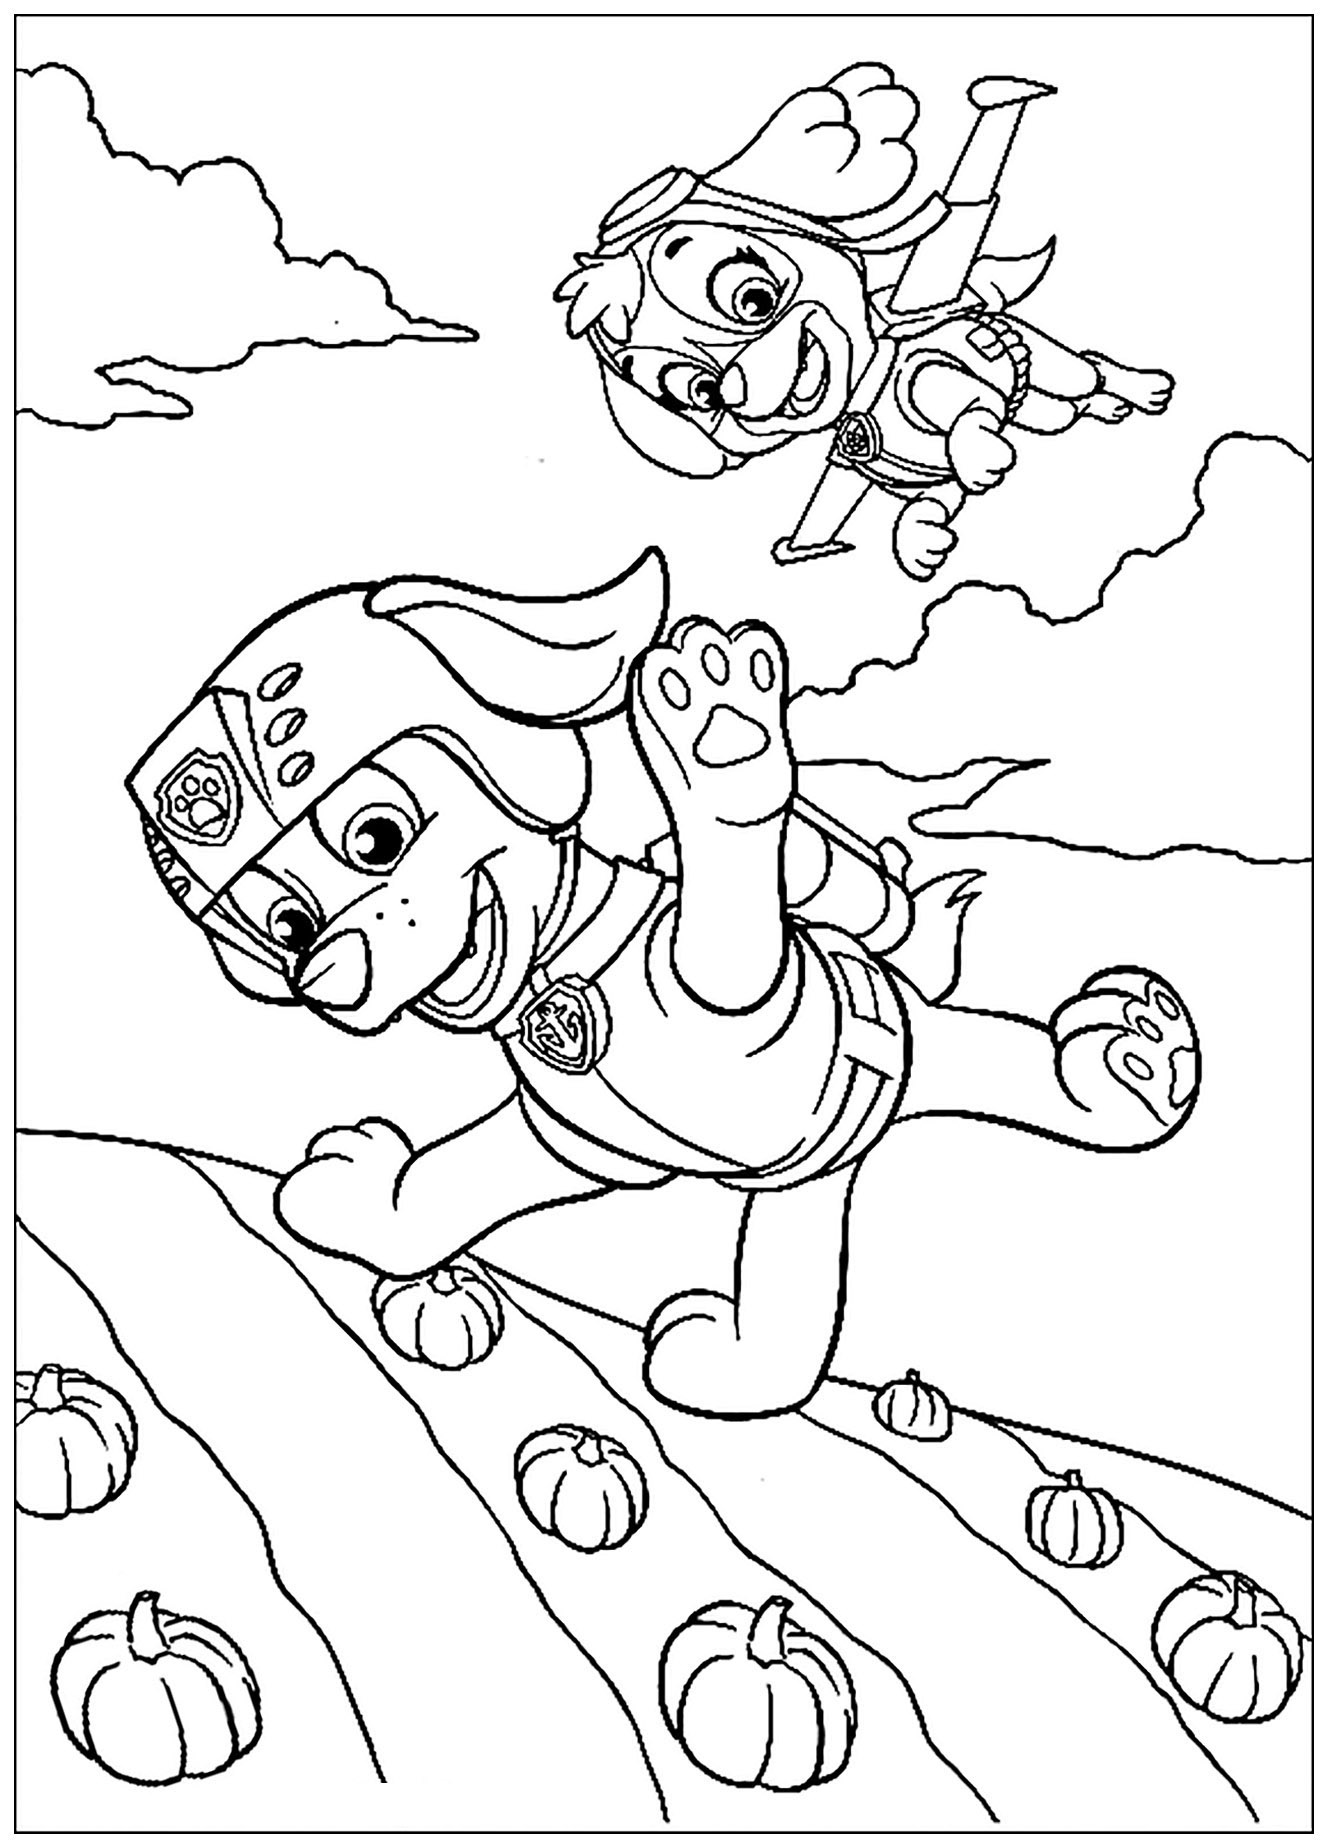 Paw Patrol Coloring Pages FREE Printable 51